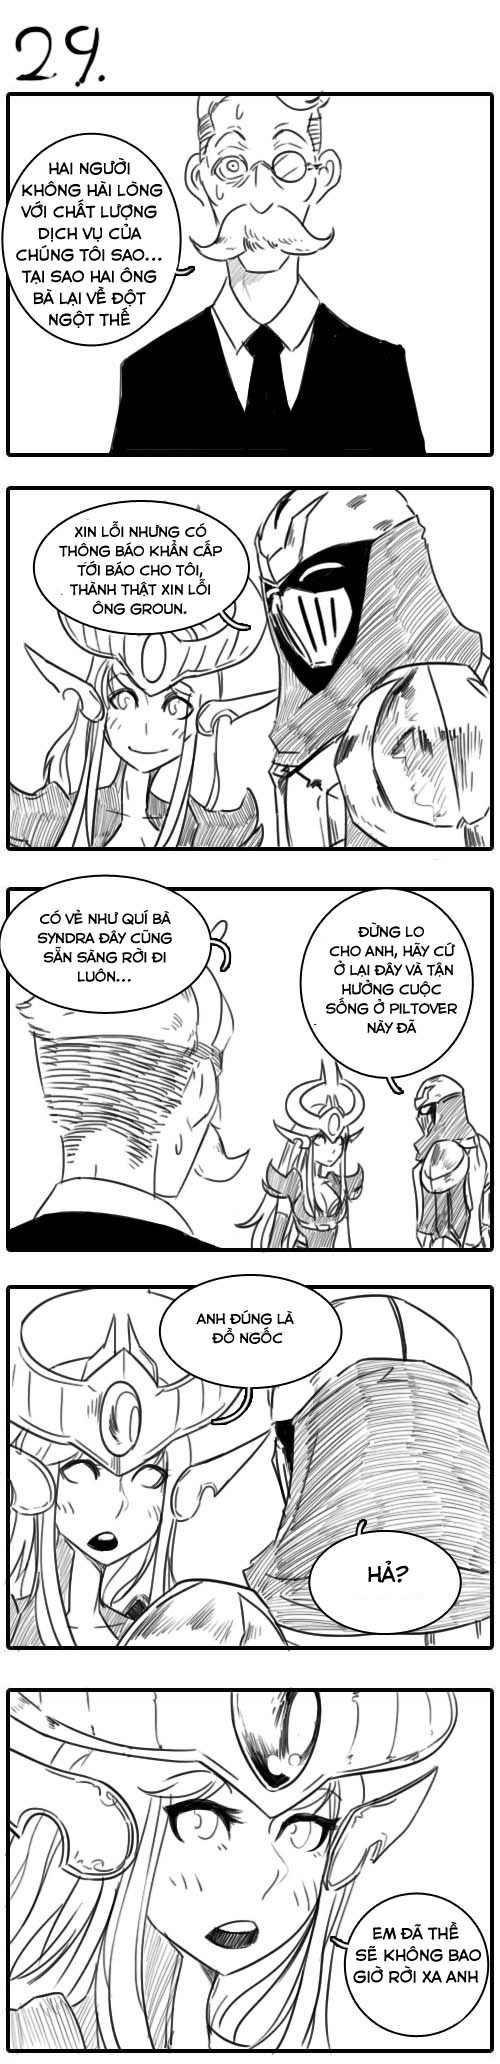 https://img-cdn.2game.vn/pictures/xemgame/2014/06/comic_zed_chap10_2.jpg